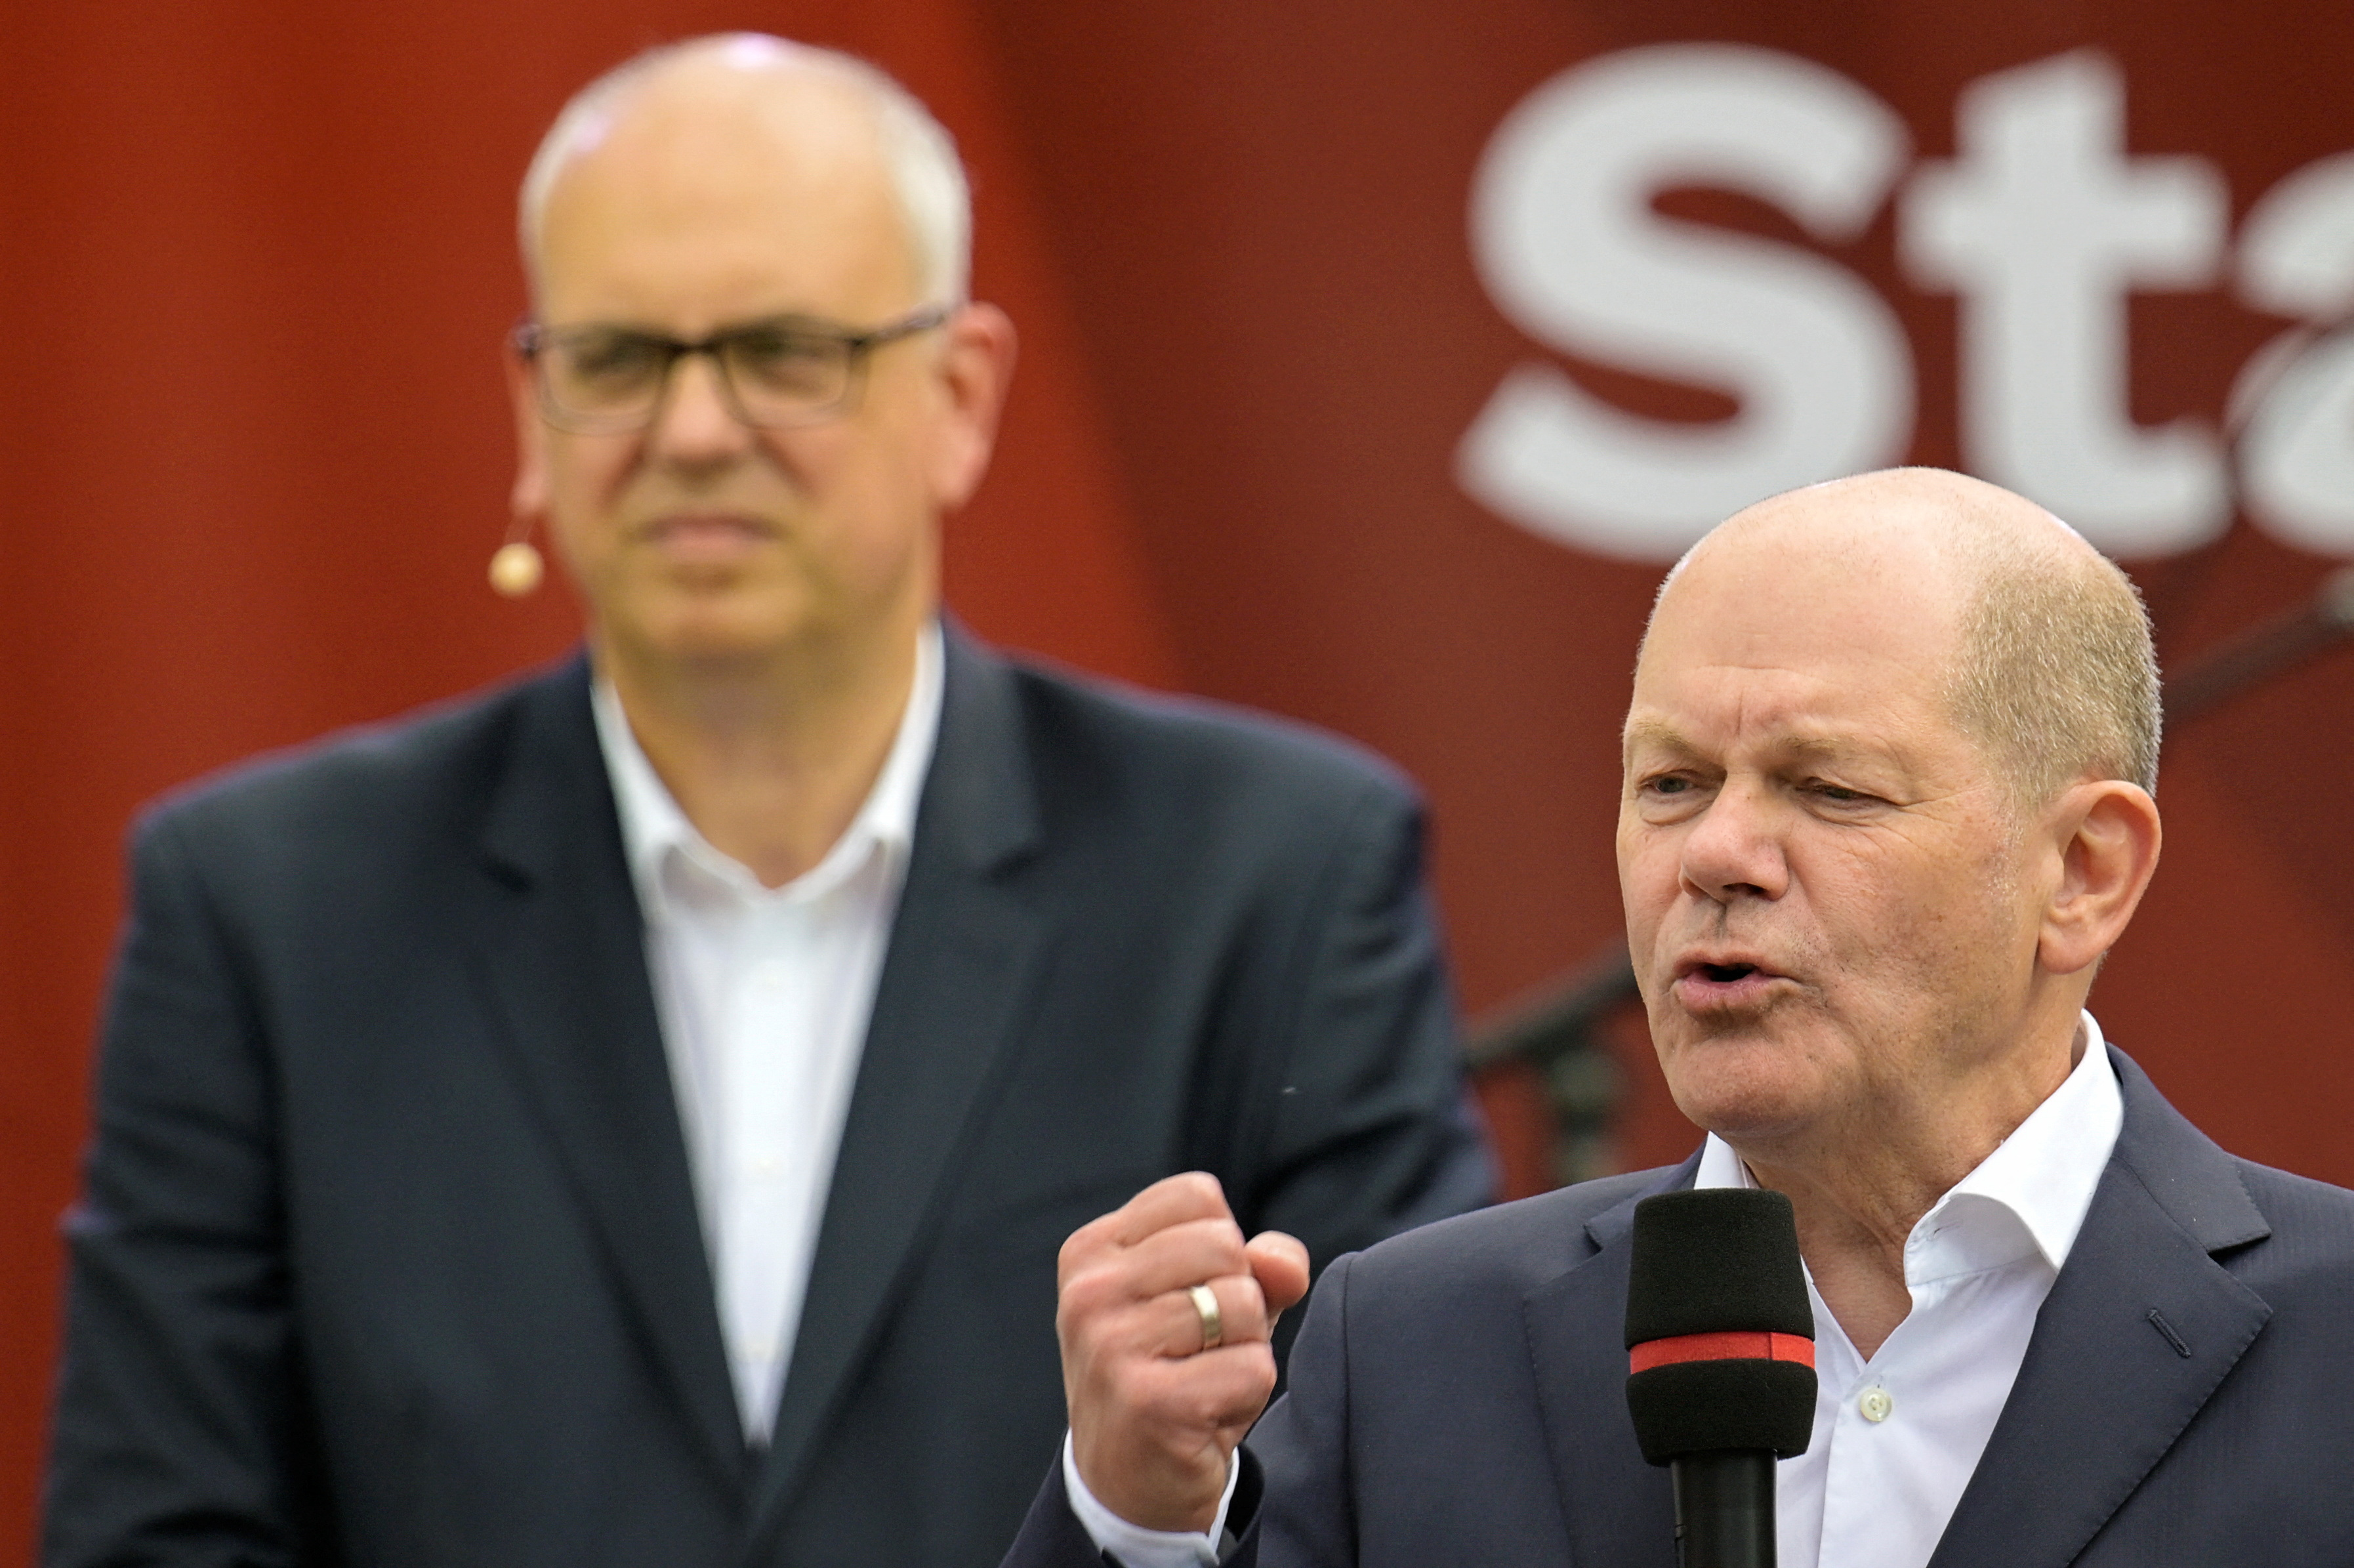 German Chancellor Olaf Scholz campaigns ahead of state elections in Bremen